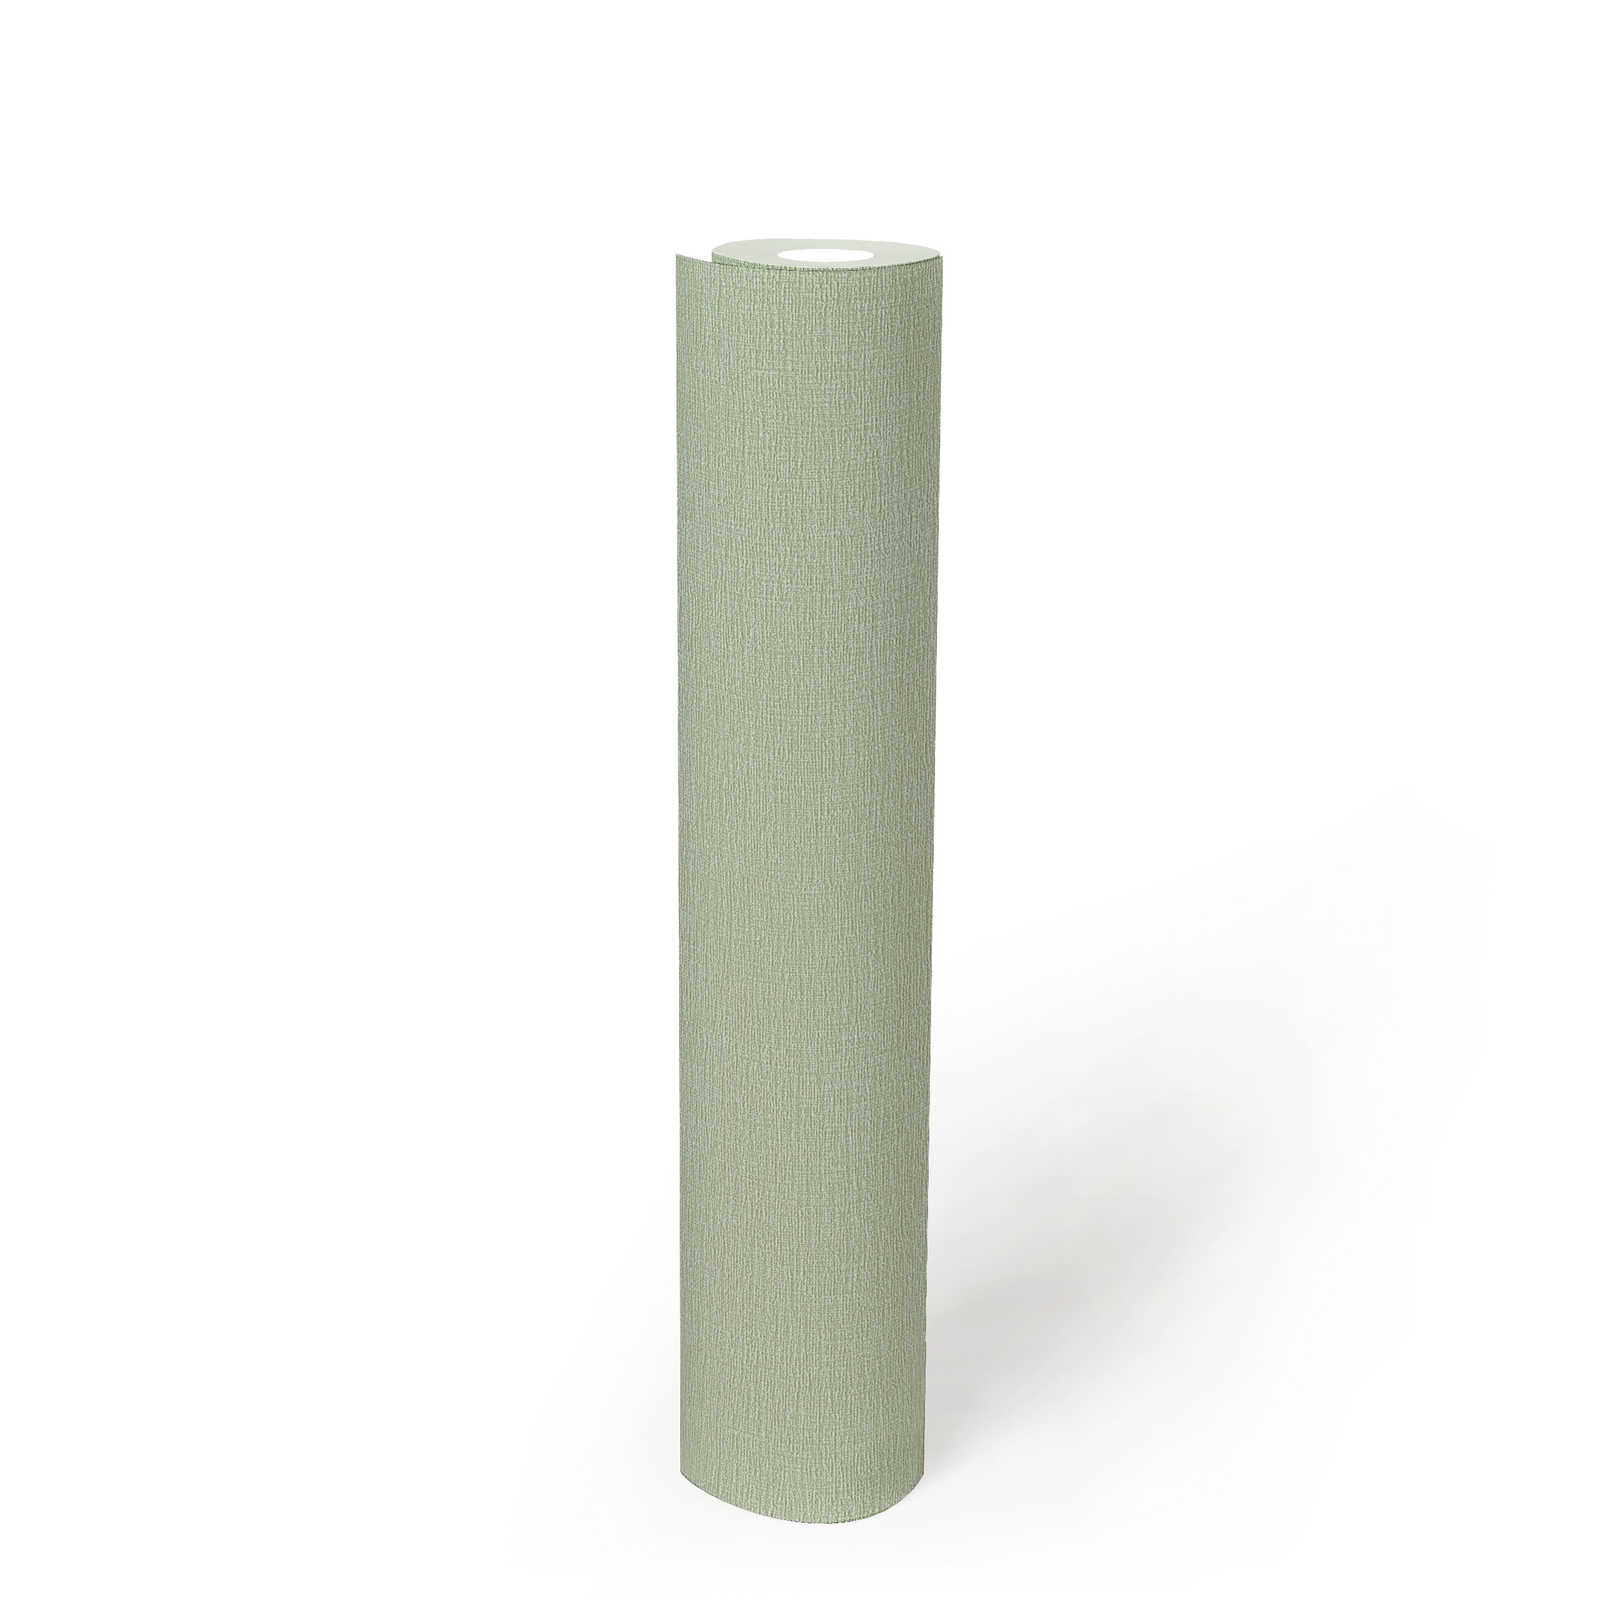             Wallpaper natural style, plain with textured pattern - green, white
        